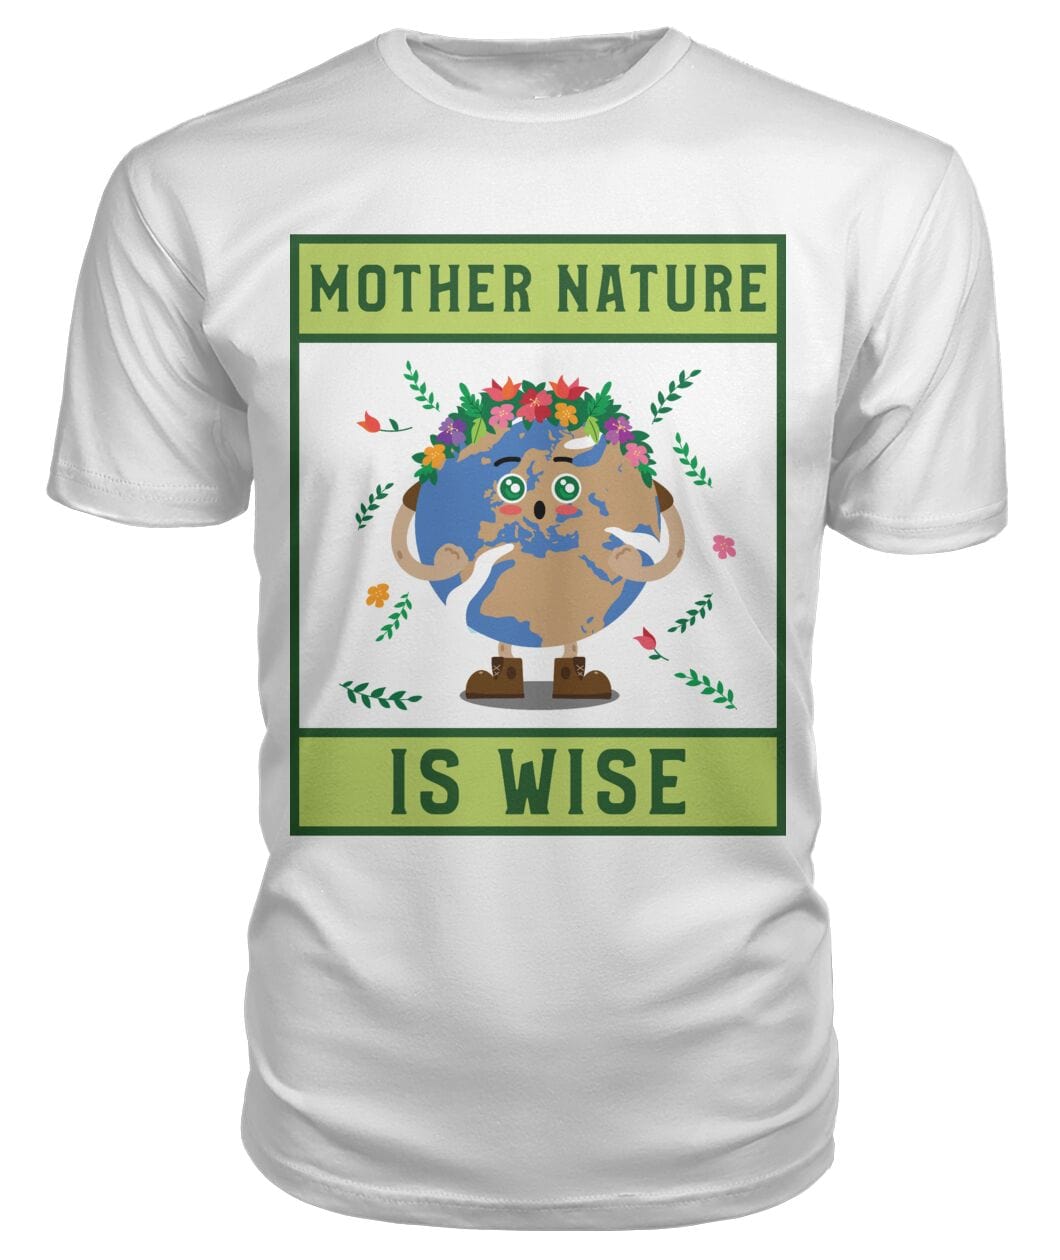 Mother Nature is Wise